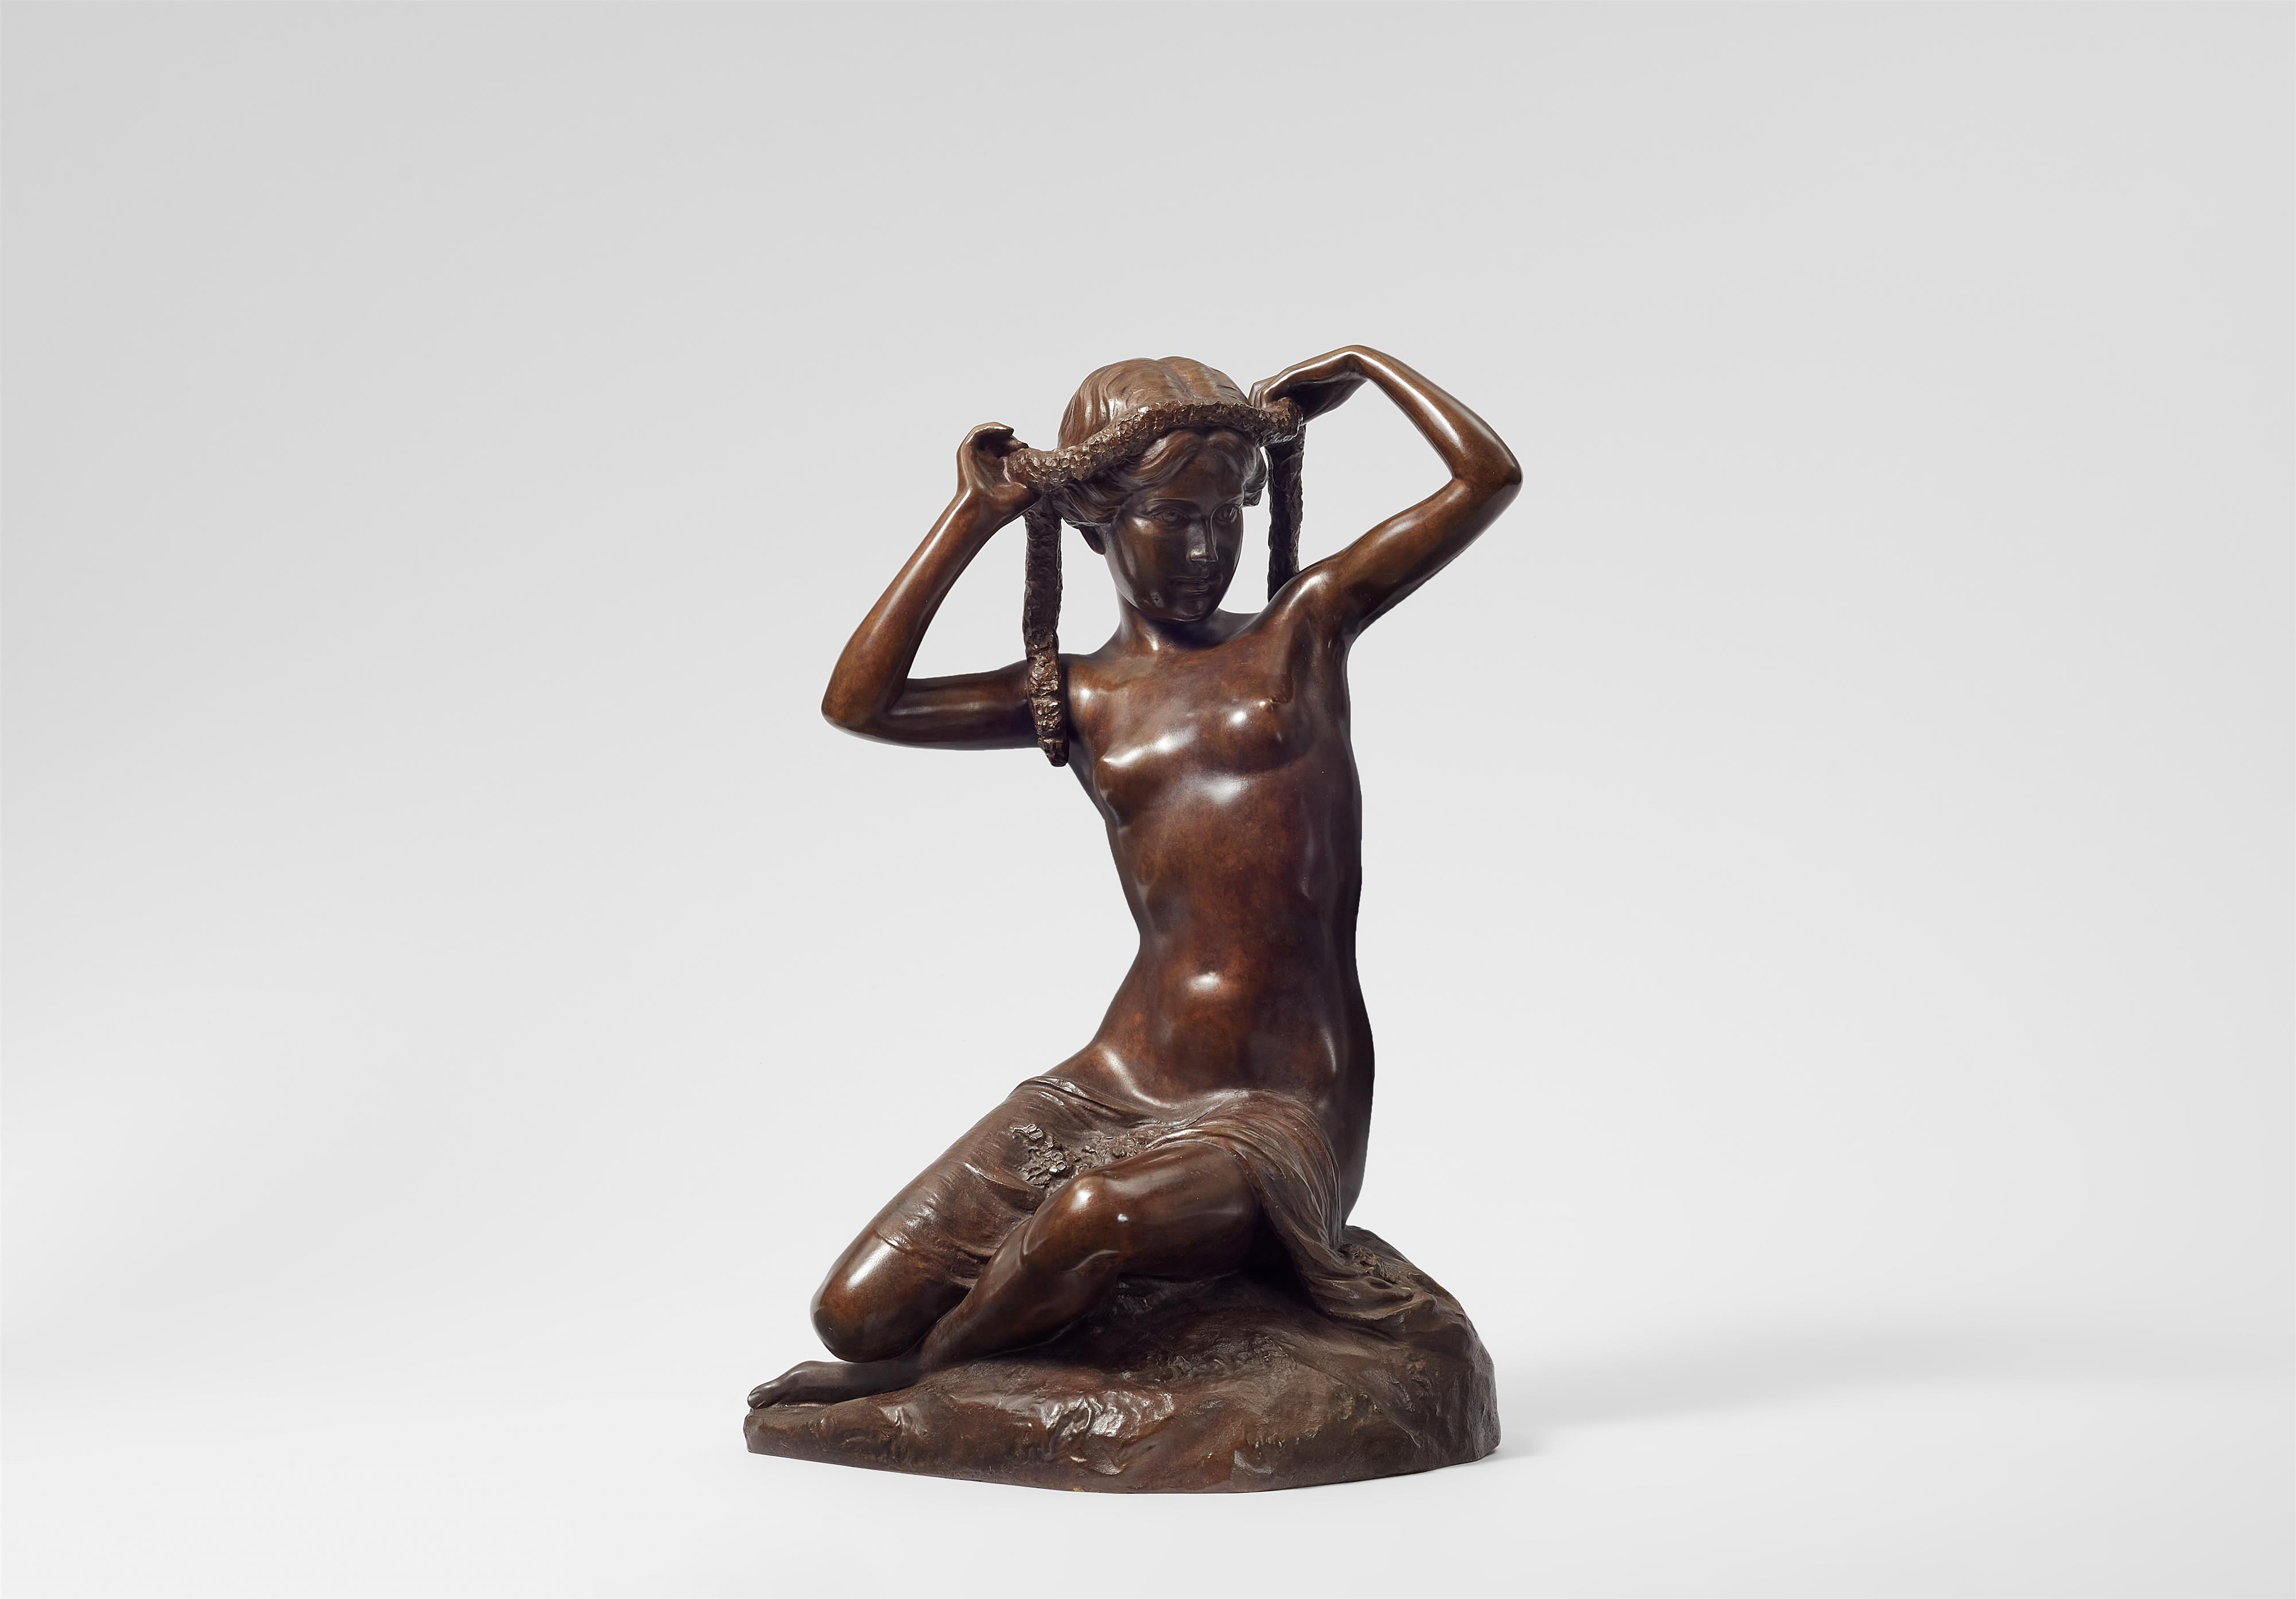 Seated figure with a wreath
by Ernst Seger (1868 - 1939) - image-1